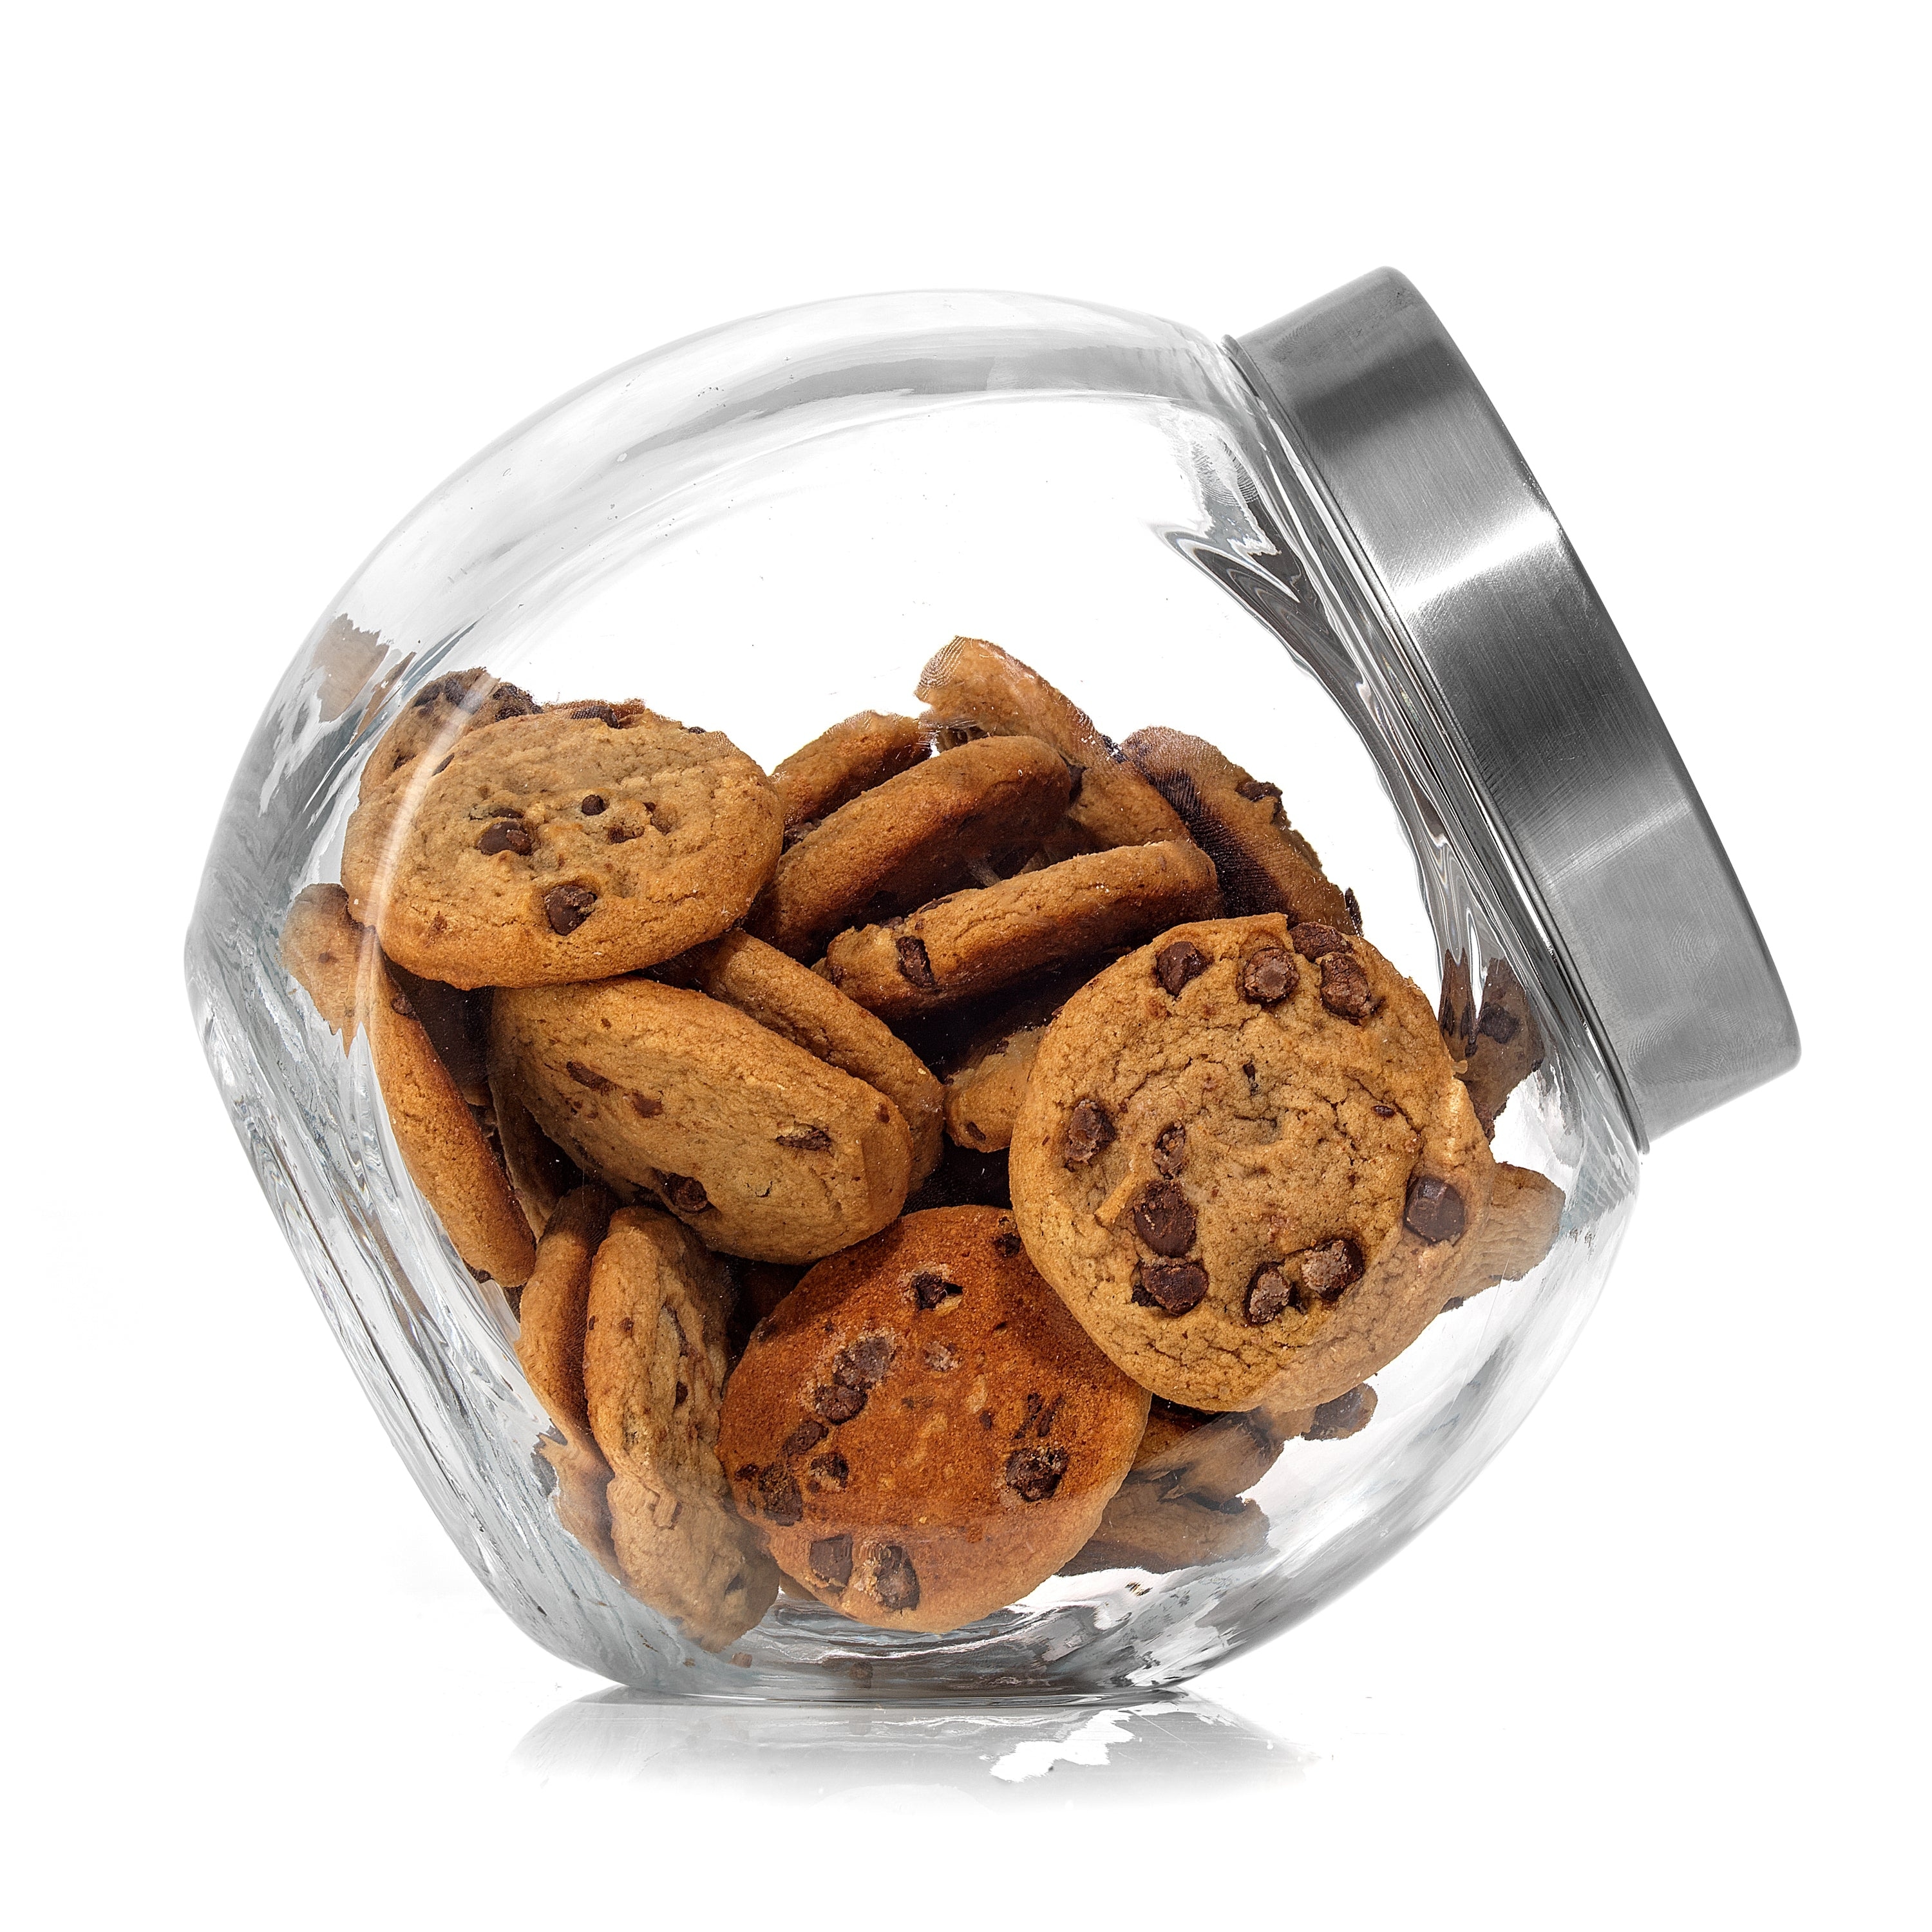 https://ak1.ostkcdn.com/images/products/is/images/direct/01e18f5cb320e5419446083027337cb98457c3a1/JoyFul-Round-Glass-Cookie-Jar-with-Airtight-Lids---67-oz---Set-of-2.jpg